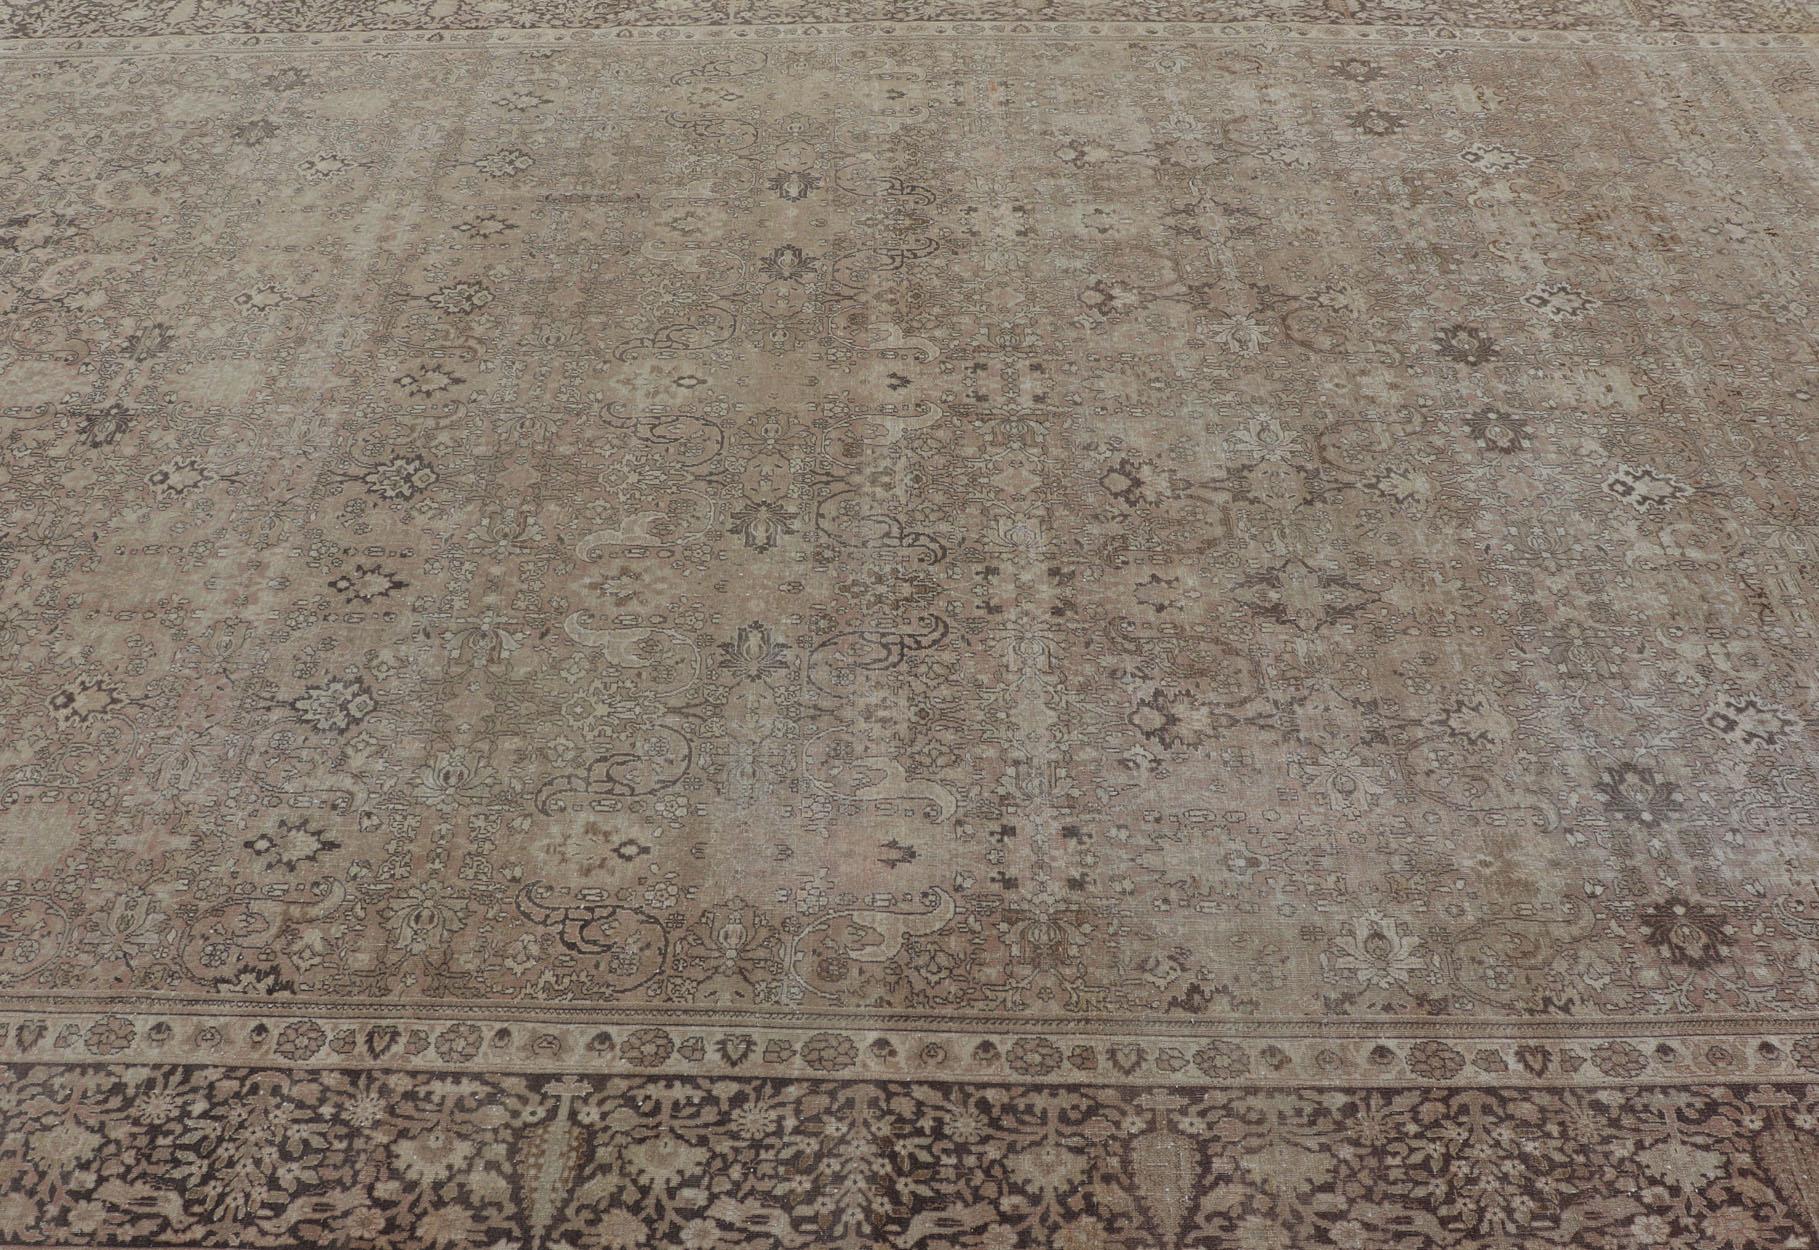 Large Antique Turkish Sivas Rug with Floral Design in Earthy Neutral Tones  For Sale 6